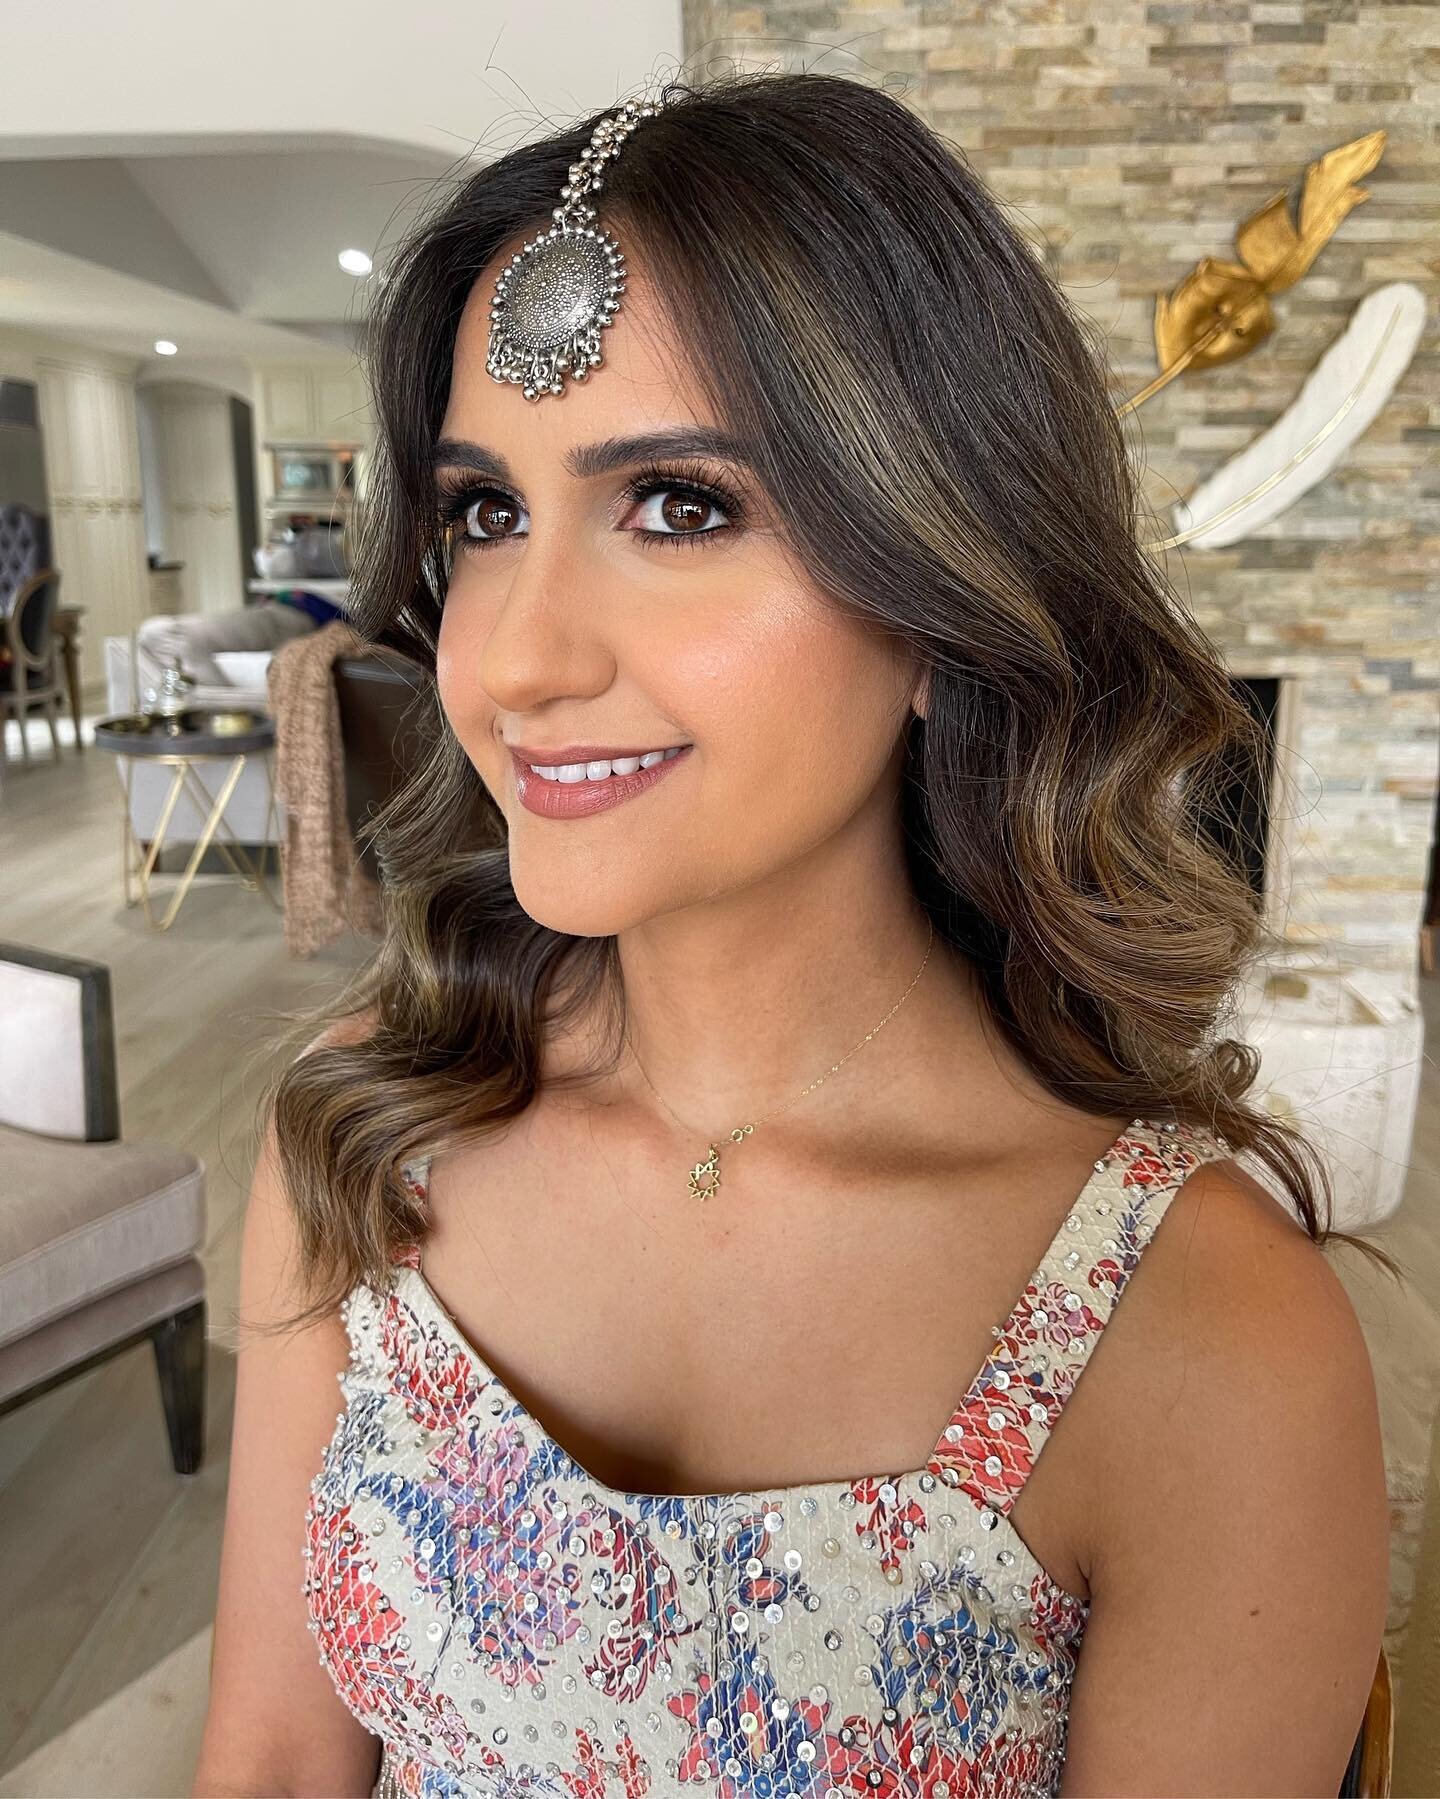 Beautiful Sherry all dolled up in soft glam for her ceremony 💕
.
Makeup by @alluringcomplexions 
On behalf of @katymobilestudio 
.
Now booking for remaining 2022 dates and 2023. Please note that your event date is not secure with our team unless a c